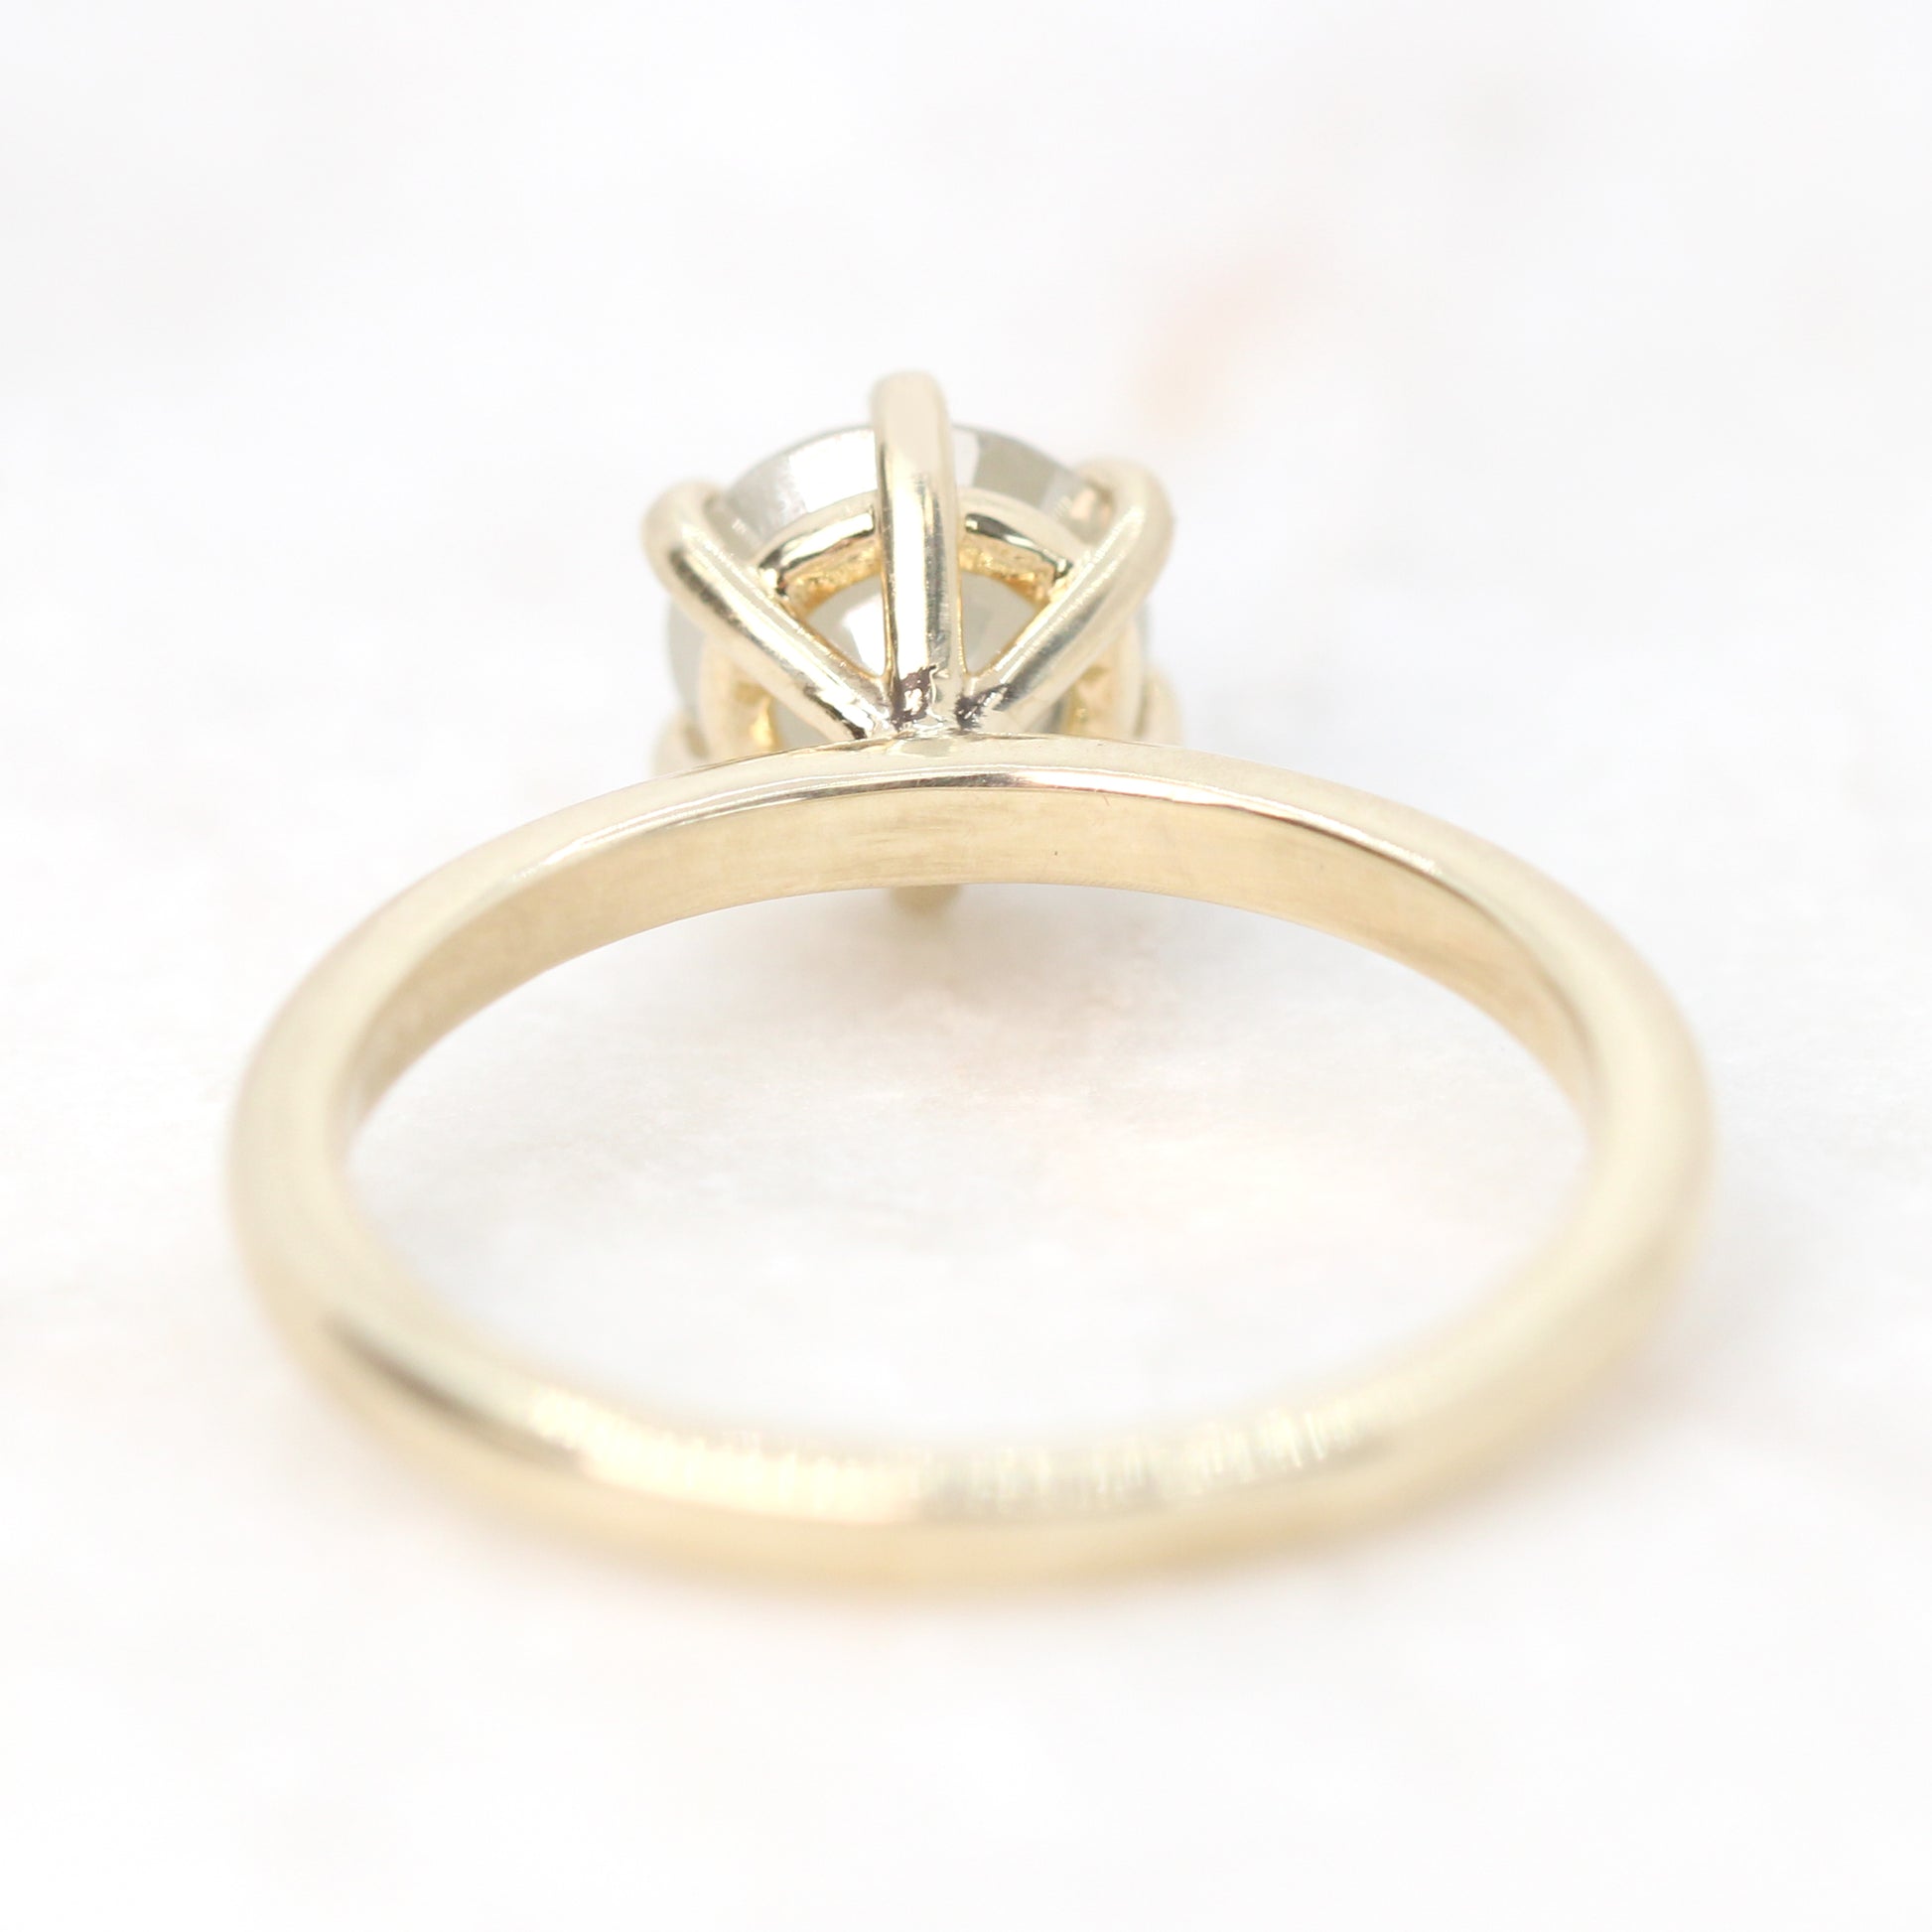 Charlotte Ring with a 1.55 Carat Round Misty White Celestial Diamond in 14k Yellow Gold - Ready to Size and Ship - Midwinter Co. Alternative Bridal Rings and Modern Fine Jewelry